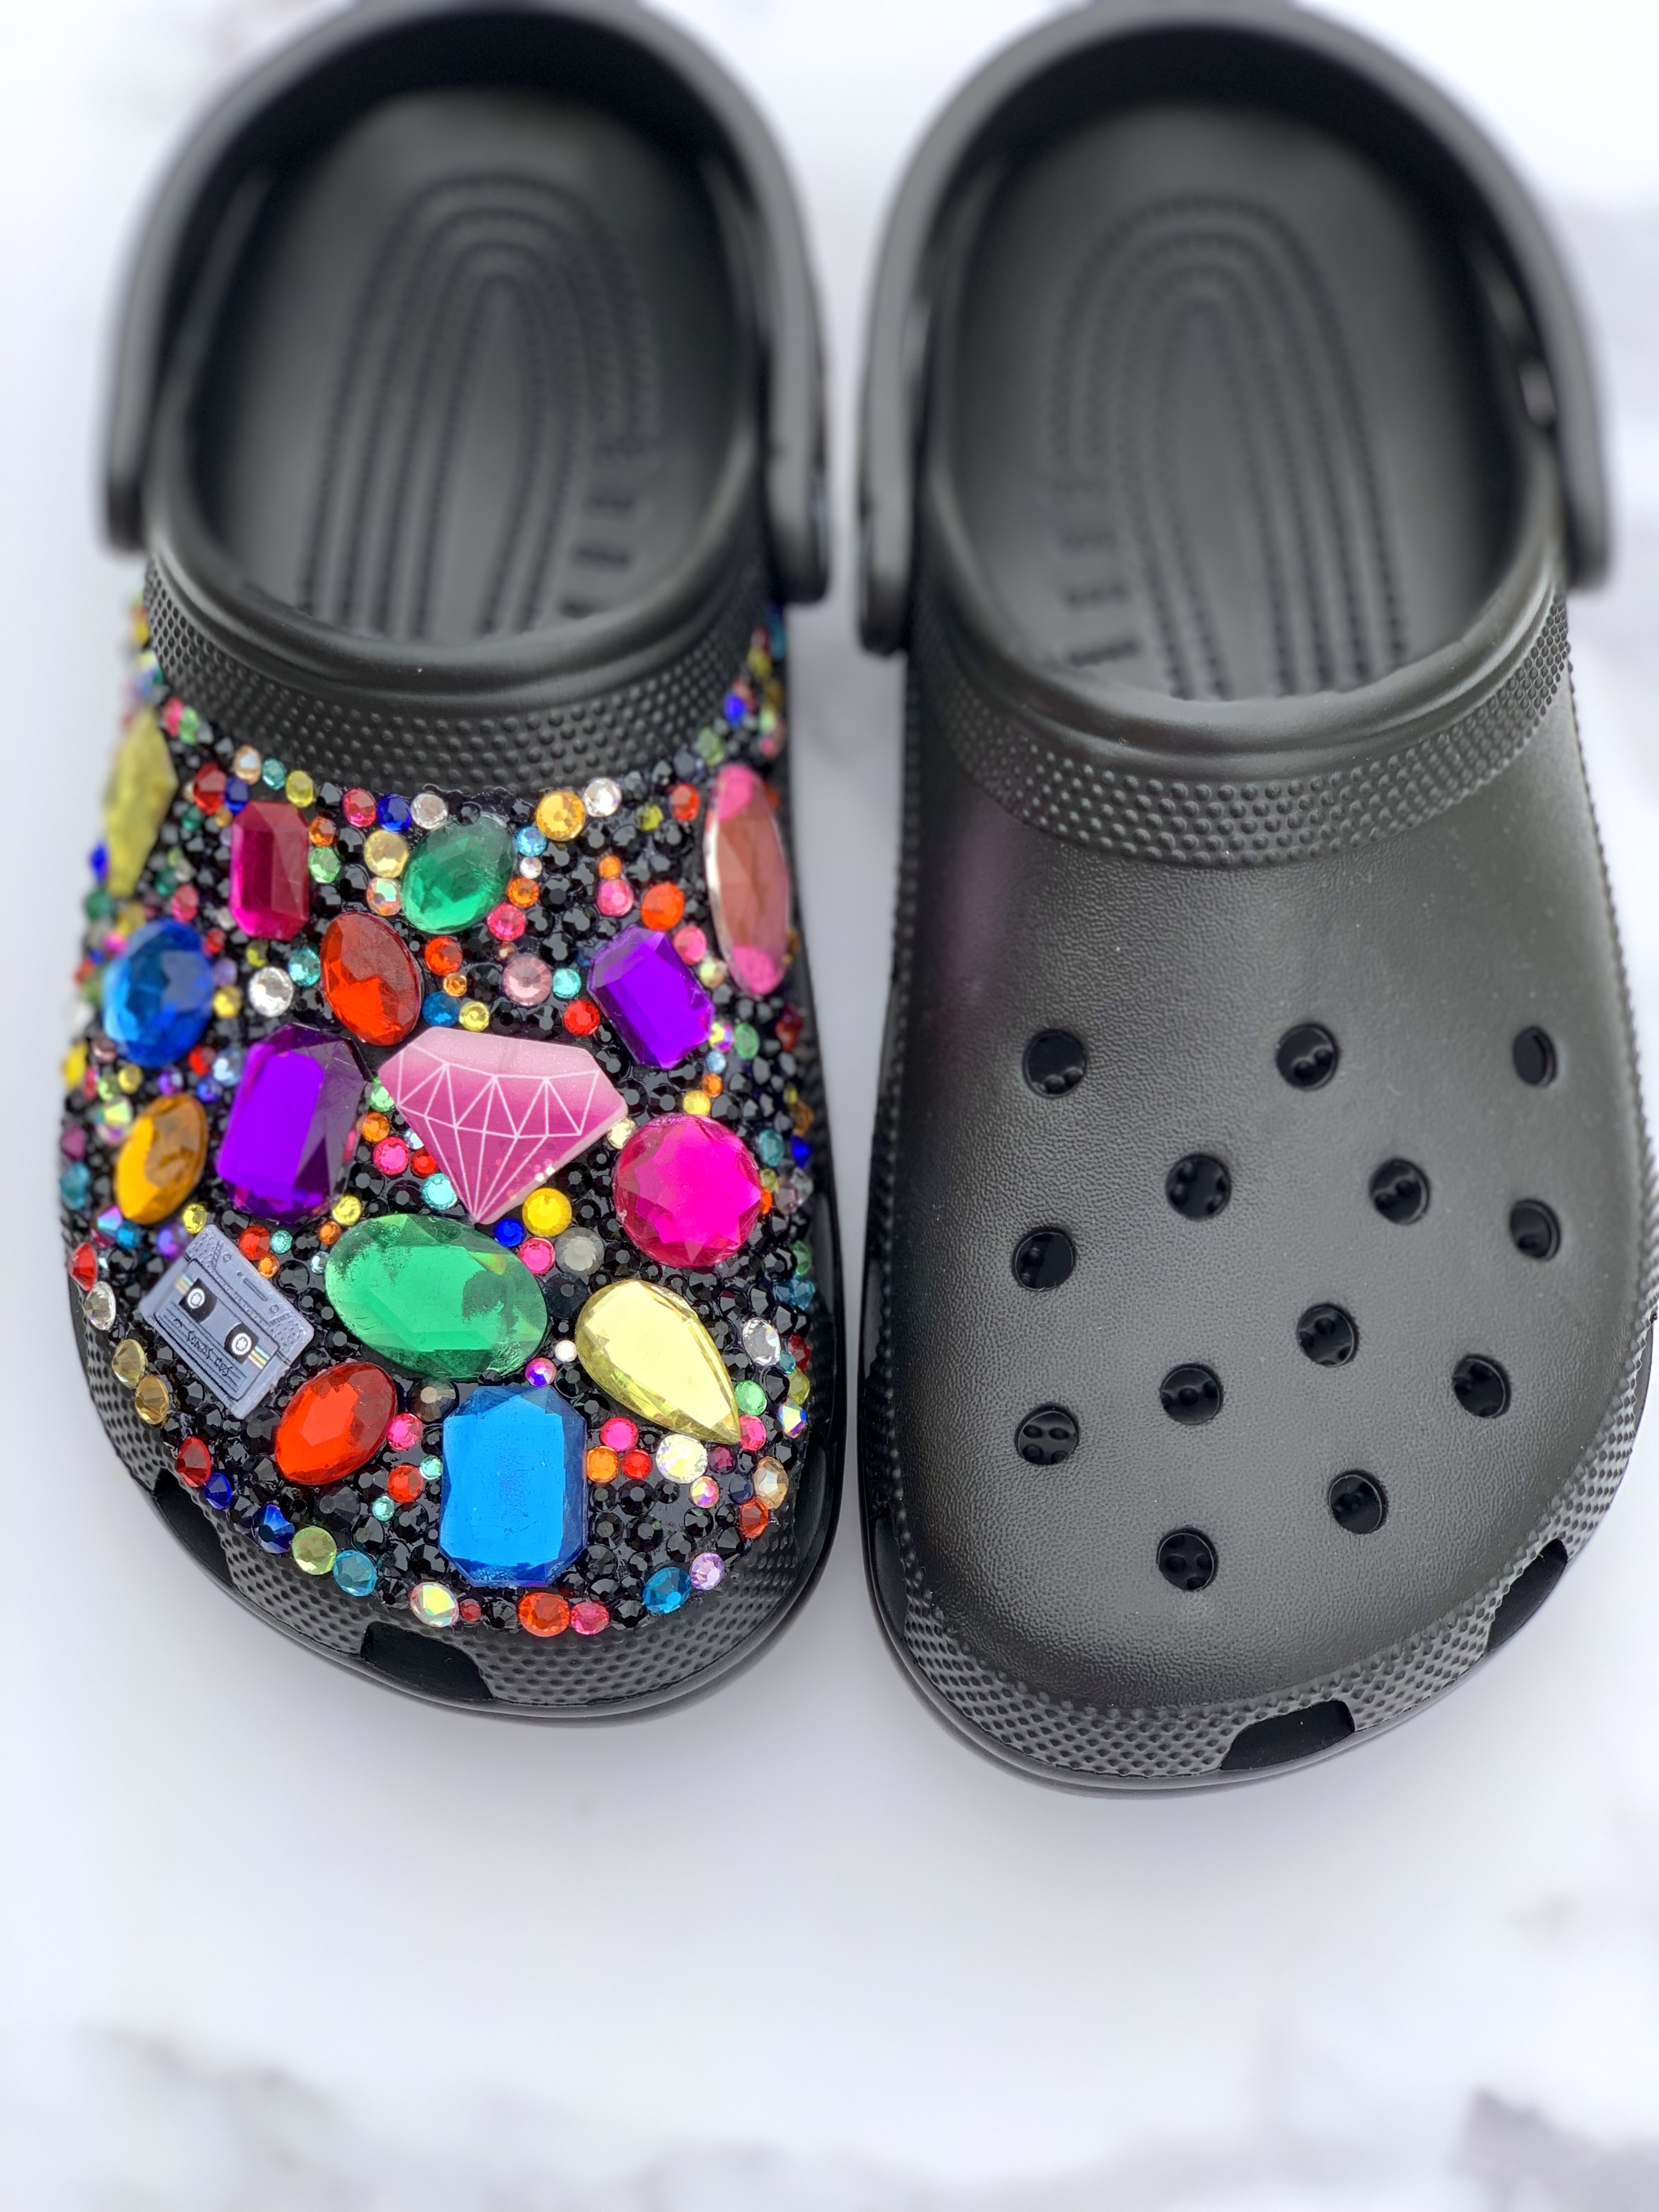 Taylor Swift Croc Jibbitz: Adding a Touch of Swift to Your Crocs